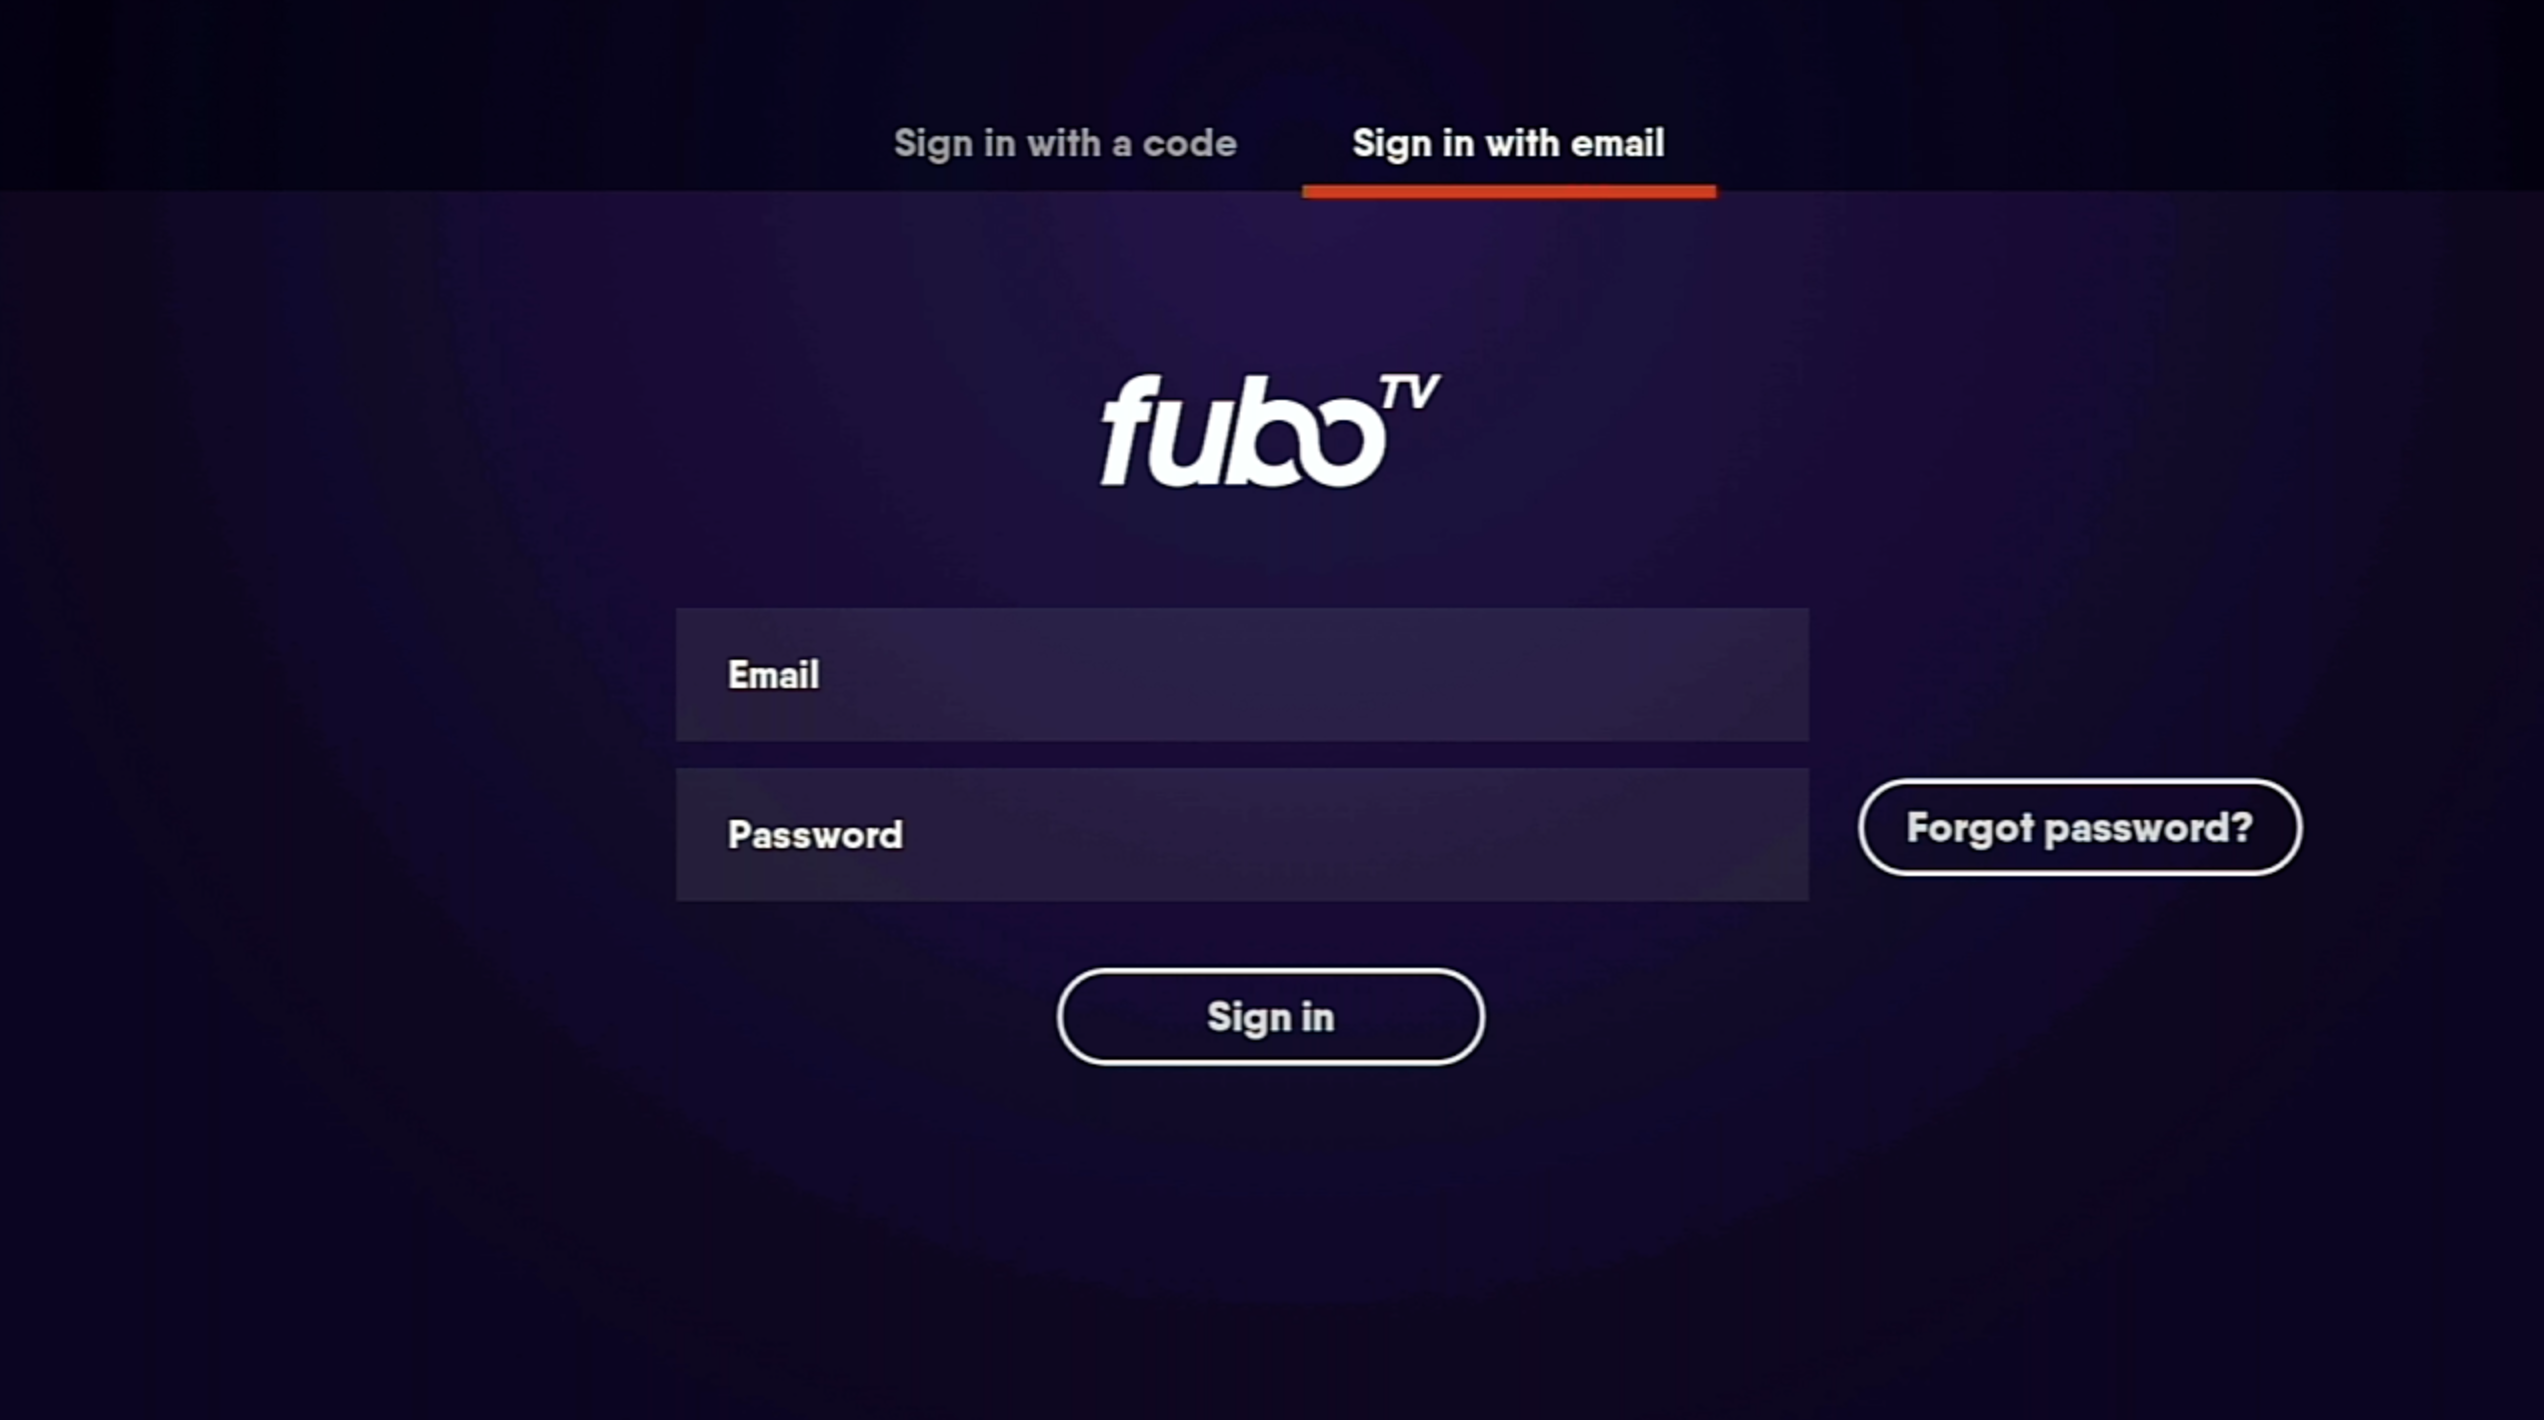 Sign in screen for the FuboTV app on Roku with email and password fields shown